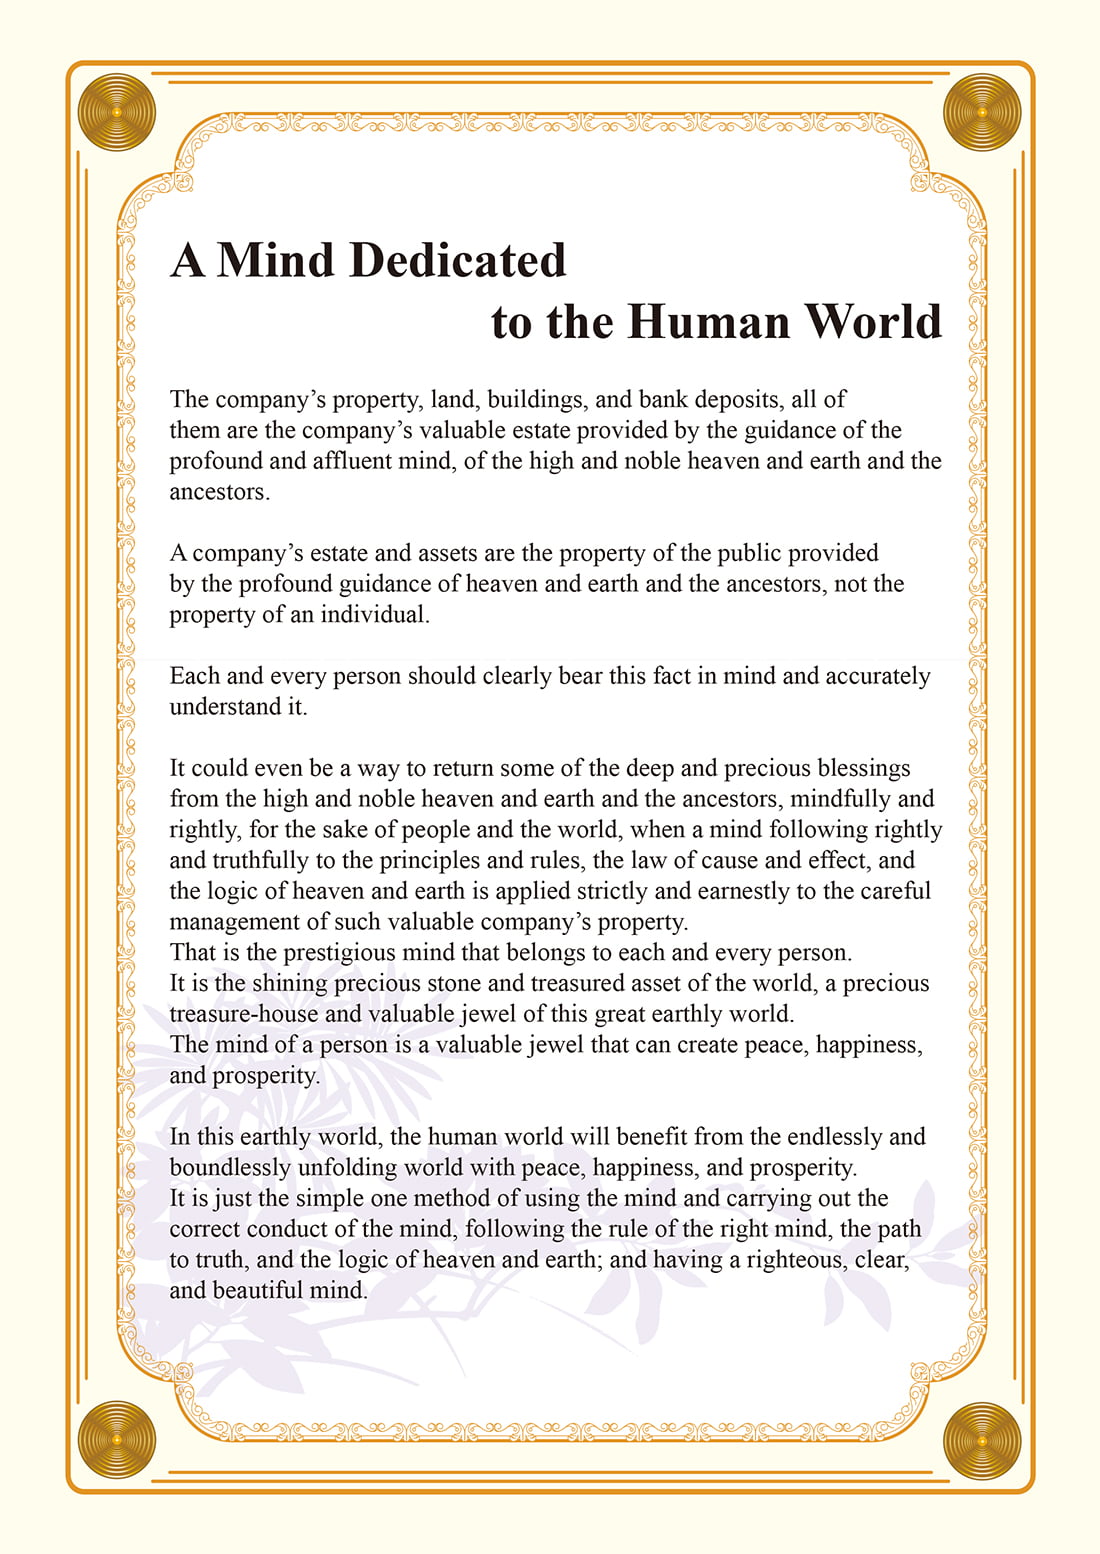 A Mind Dedicated to the Human World